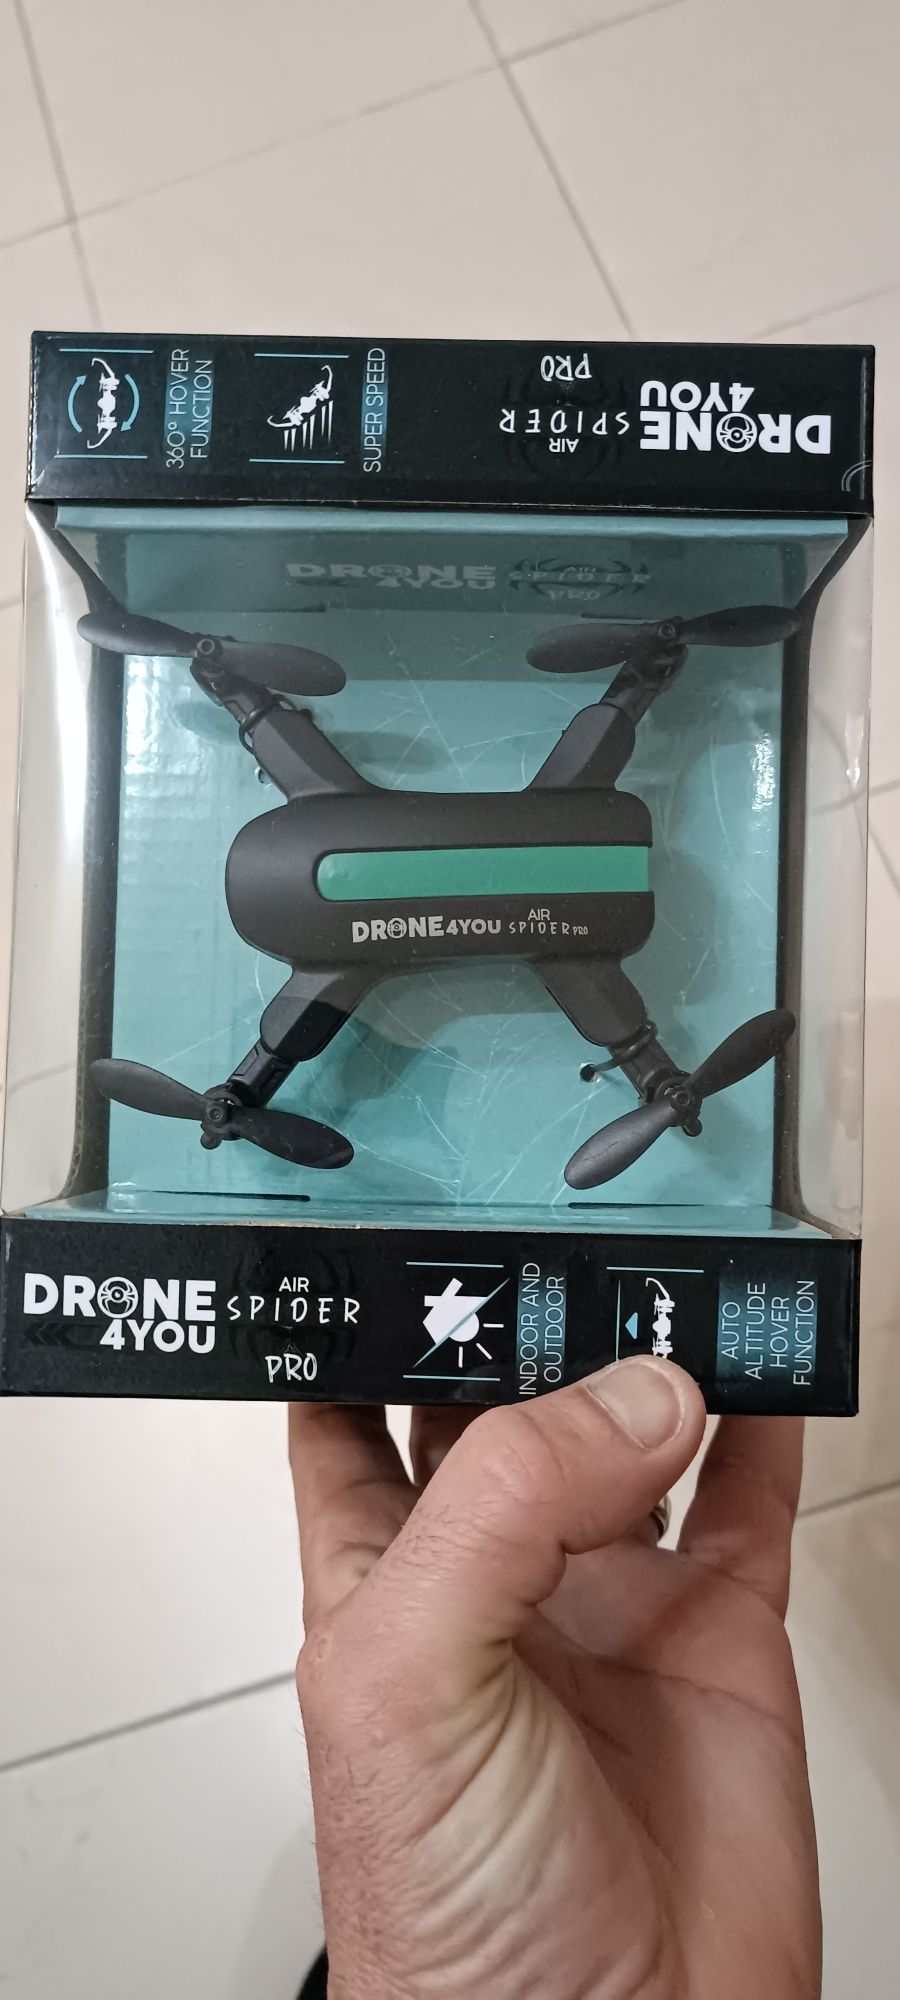 Drone 4you Air spider pro